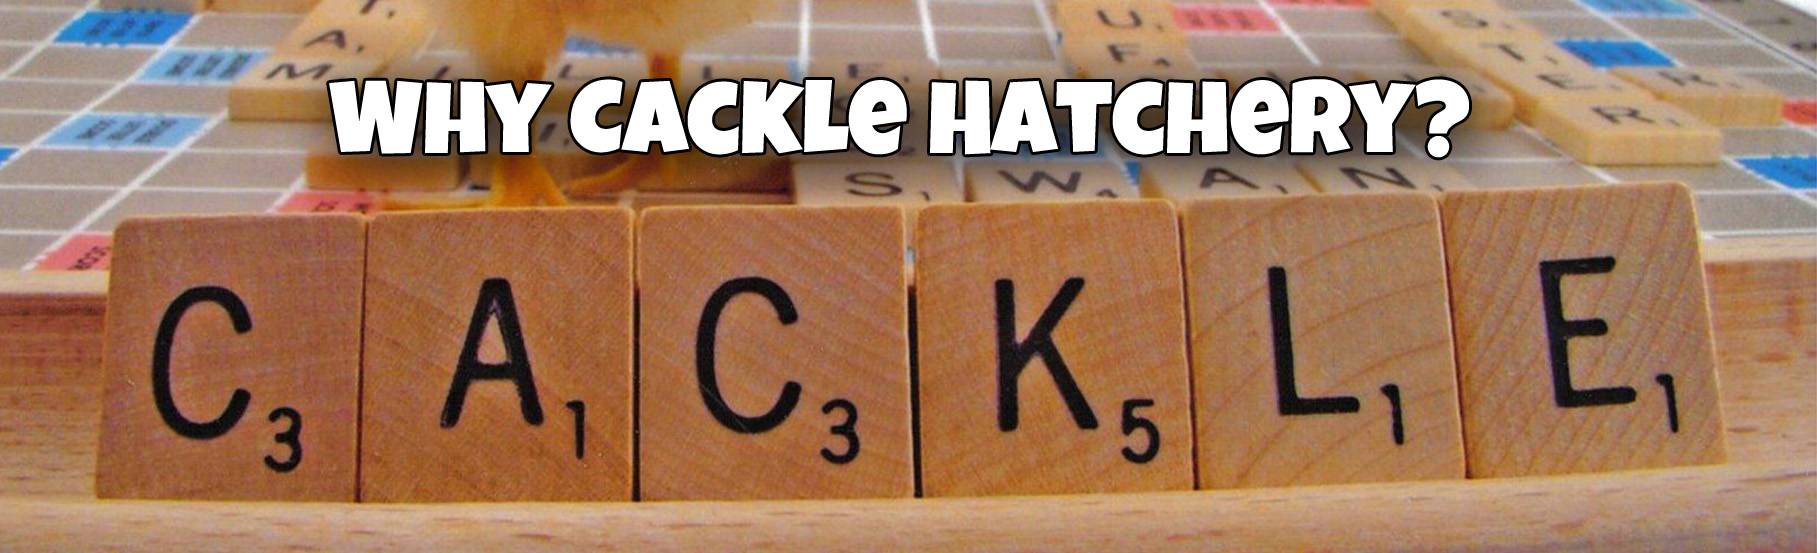 What to Do with Wooden and Ceramic Eggs - Cackle Hatchery